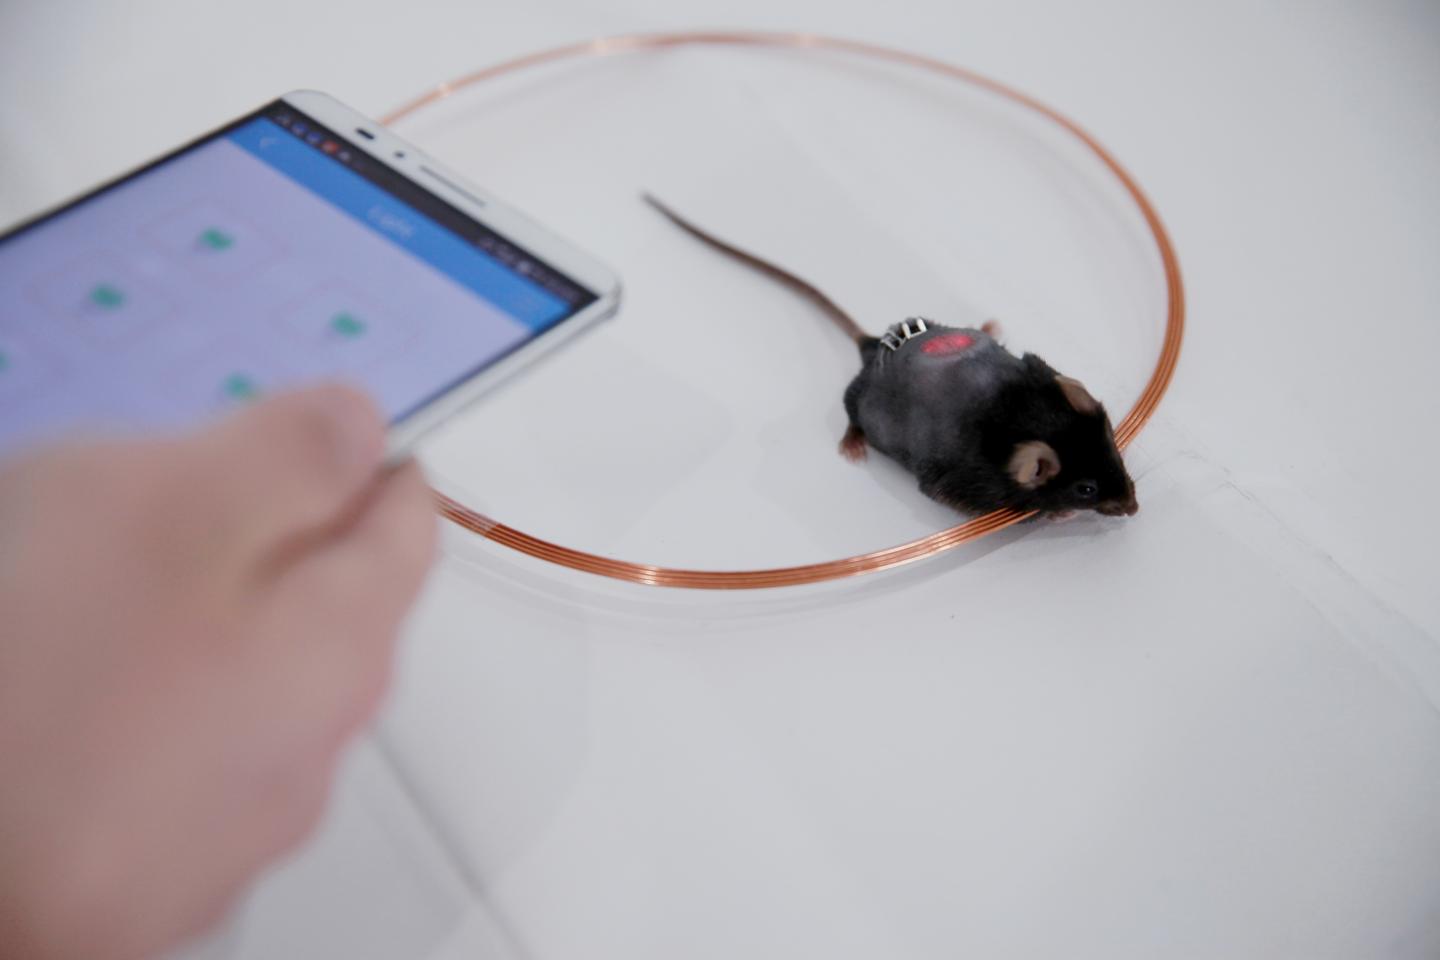 The diabetic mouse in this image was given a HydrogeLED, a hydrogel implant containing optogenetically engineered cells and biocompatible LED lights. Far-red light triggers the cells to produce hormones that help maintain blood sugar levels, and the lights can be turned on or off with a smartphone. [Shanghai Key Laboratory of Regulatory Biology]